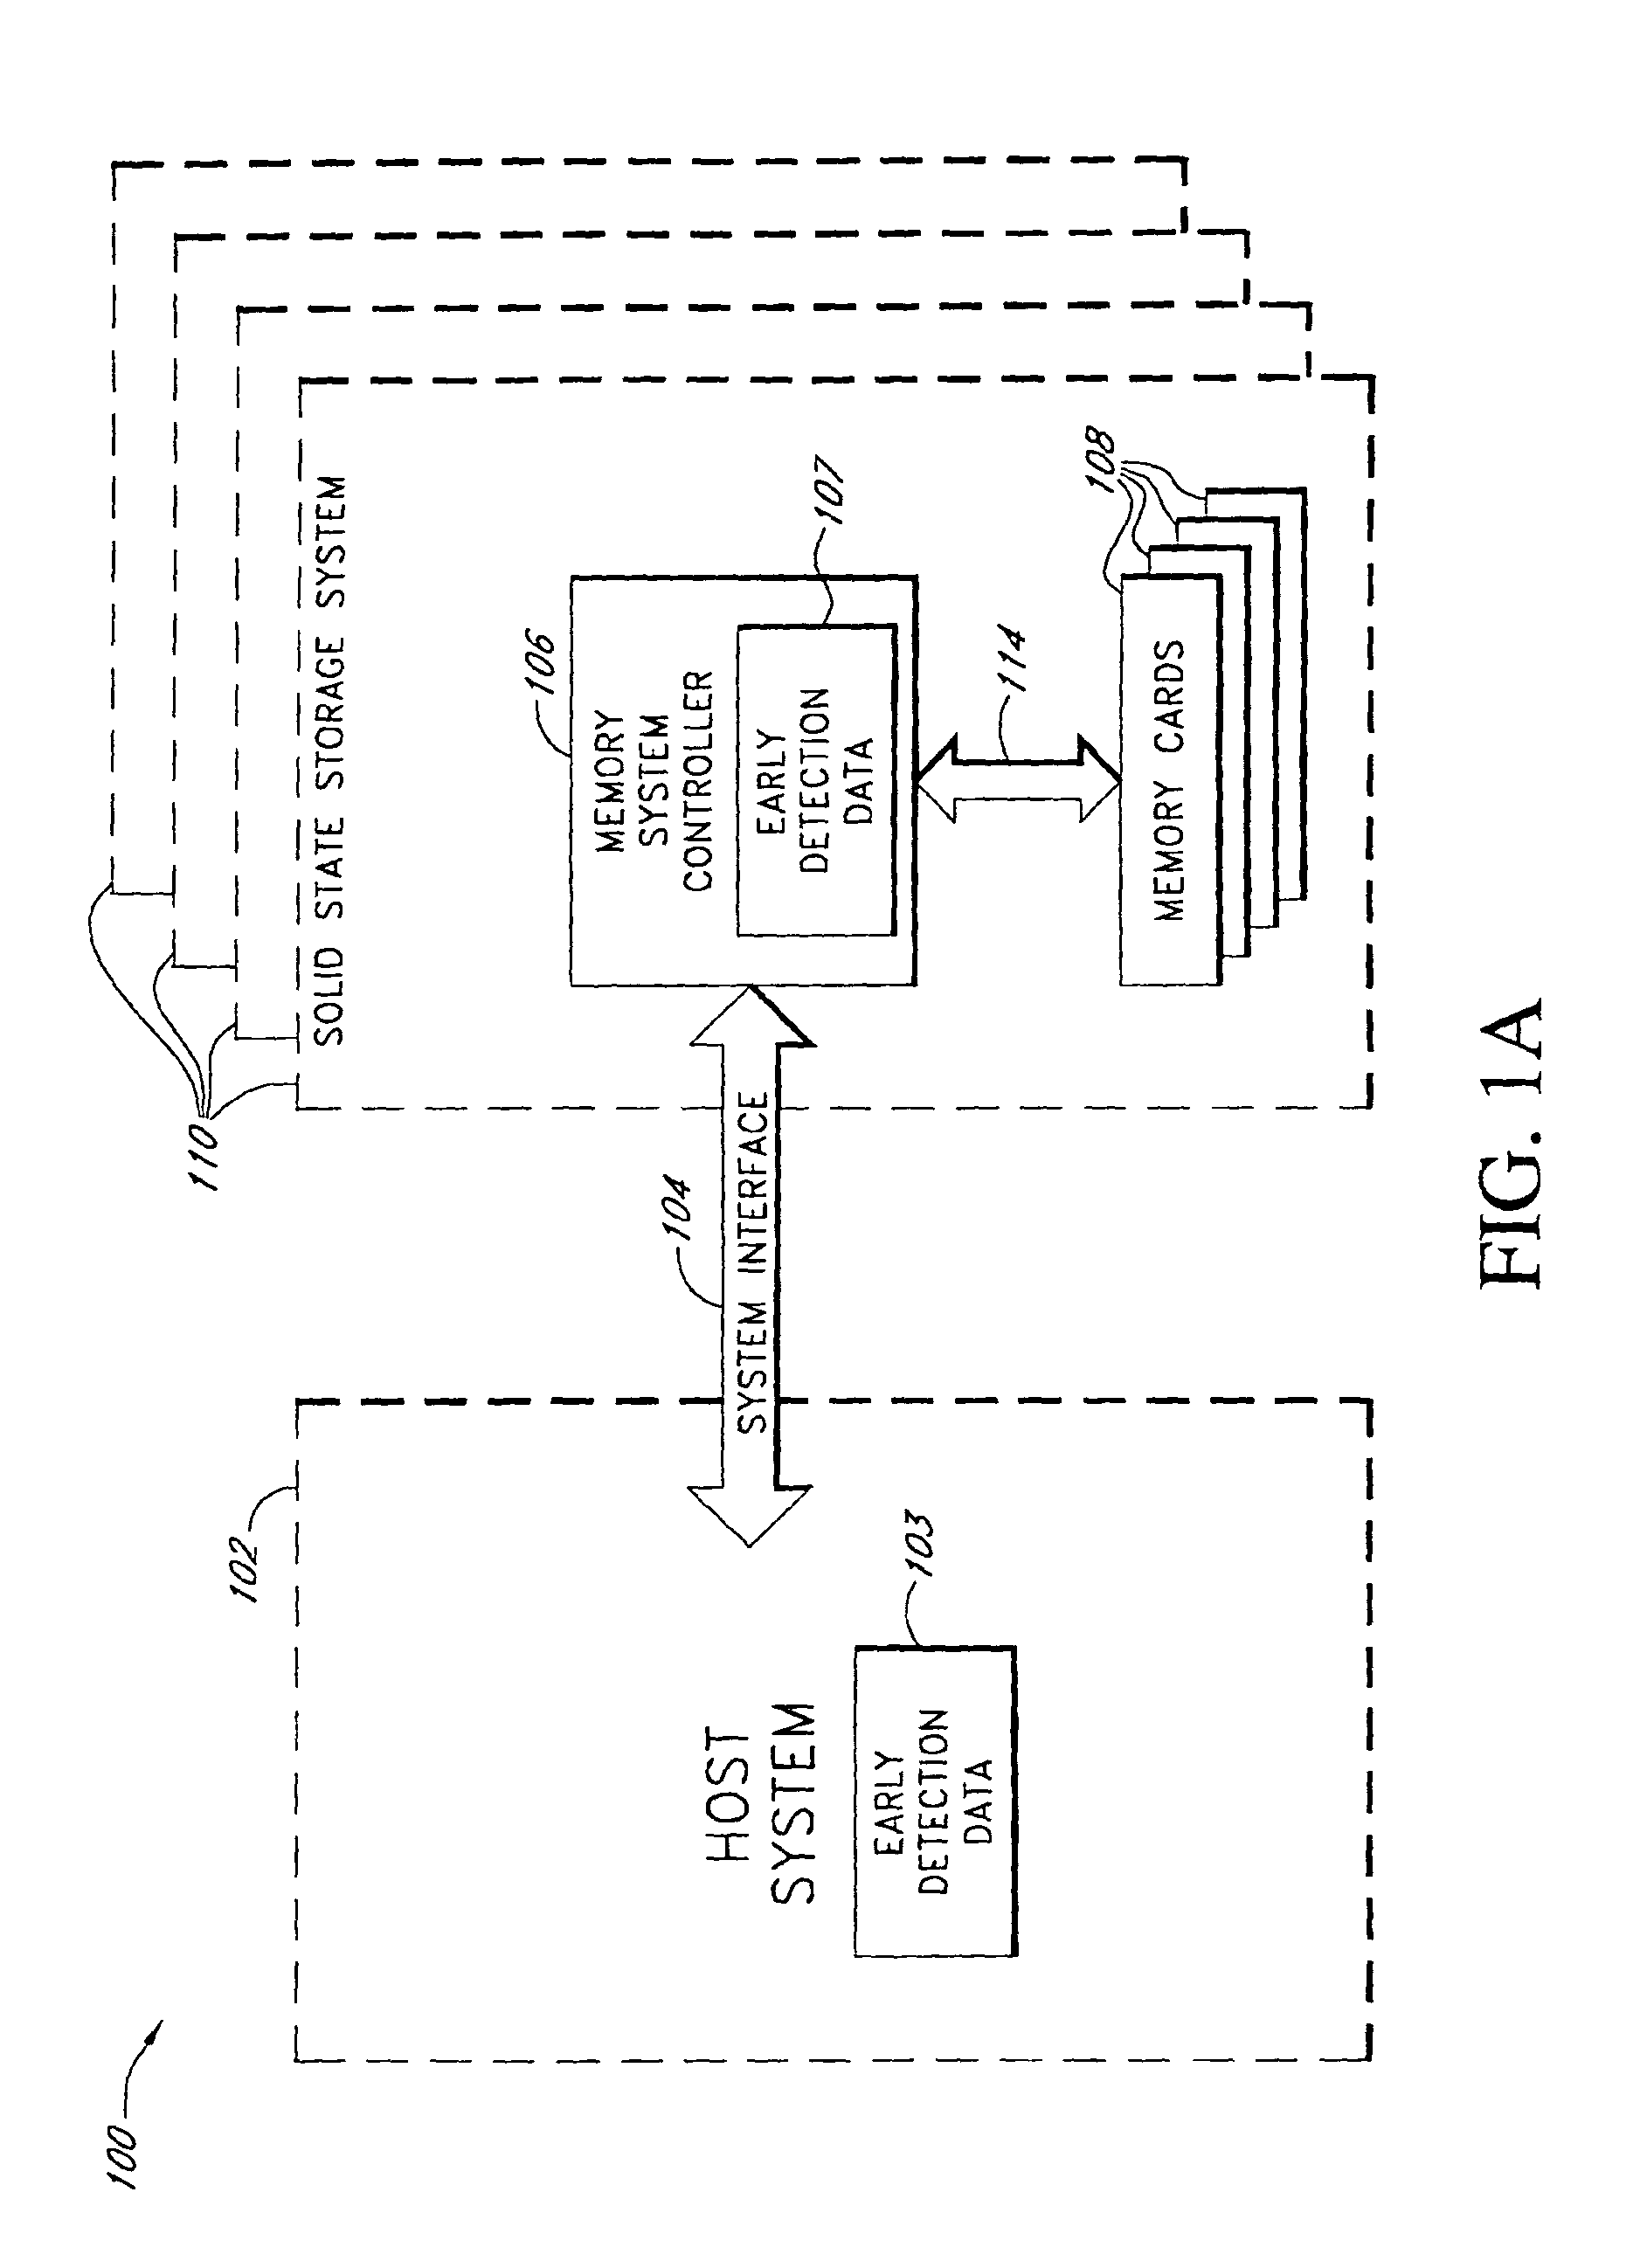 System and method for early detection of failure of a solid-state data storage system